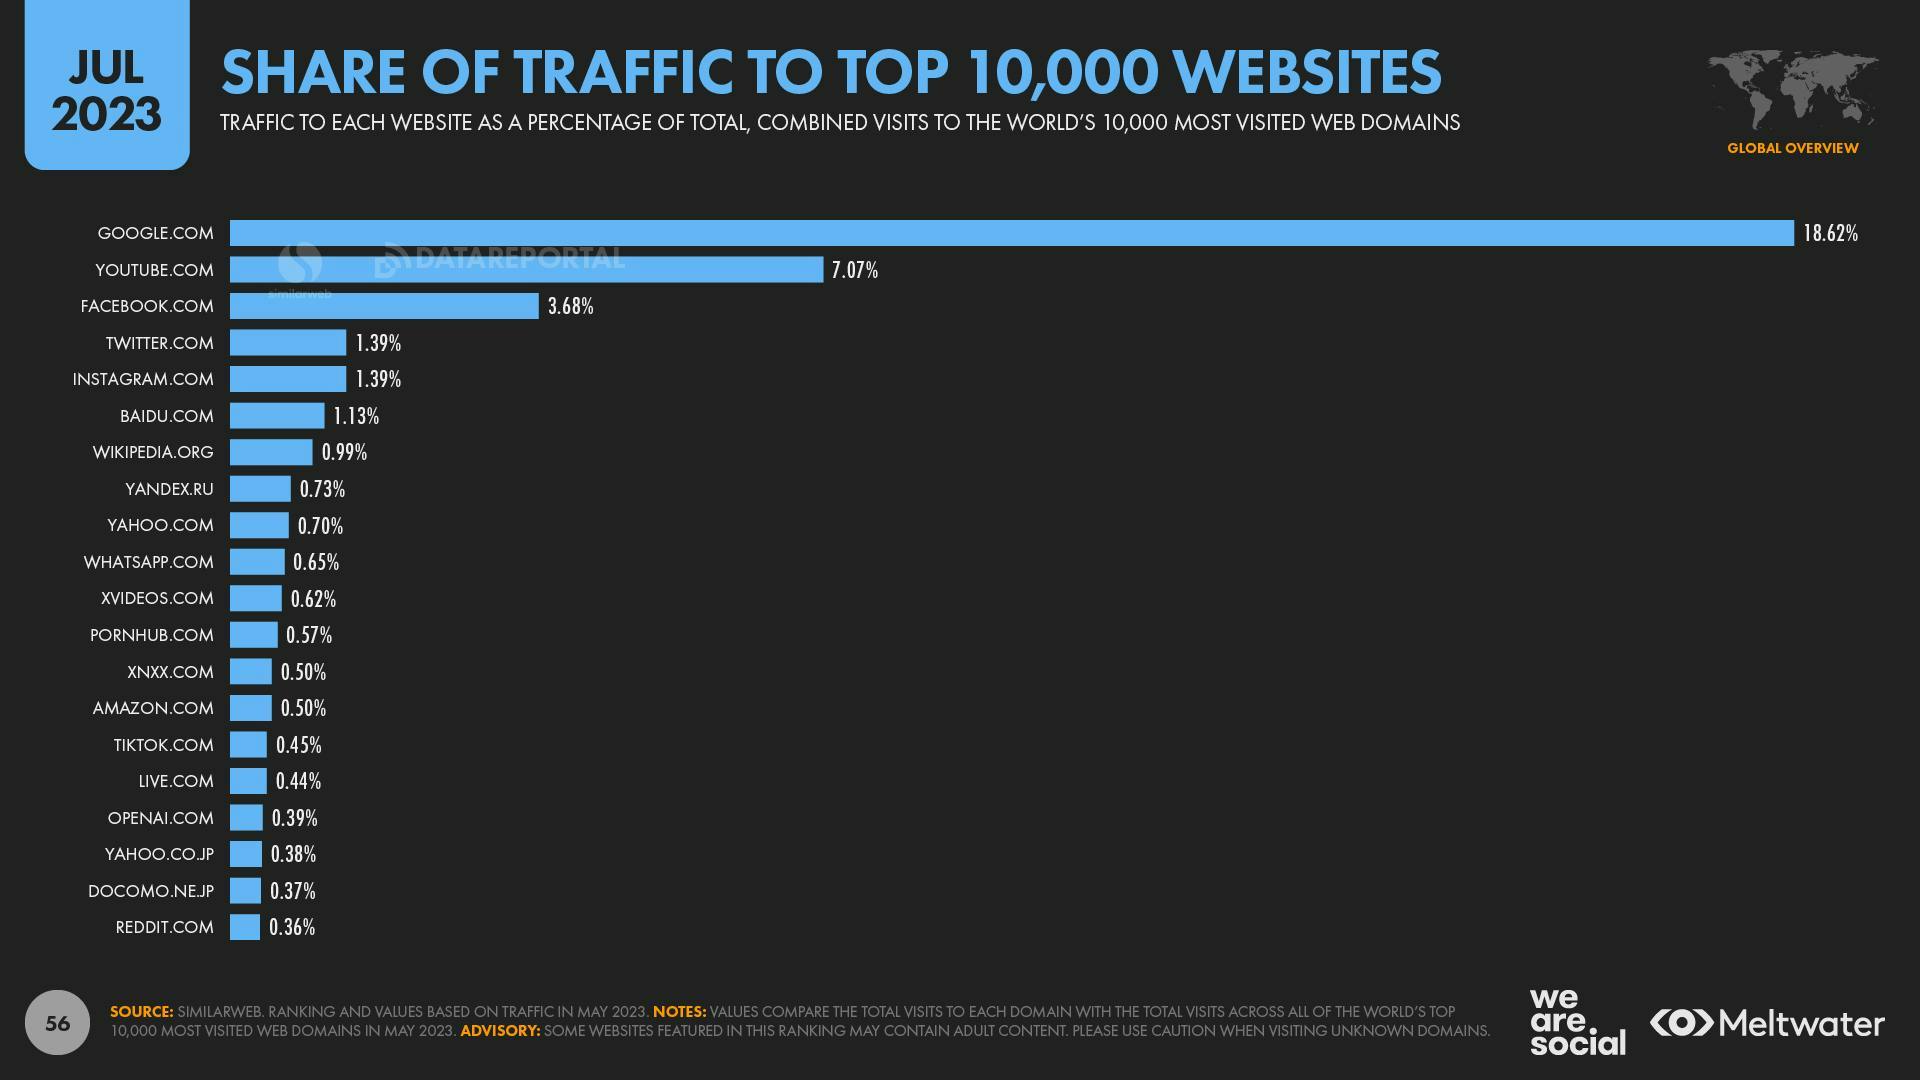 Share of traffic to top 10,000 websites